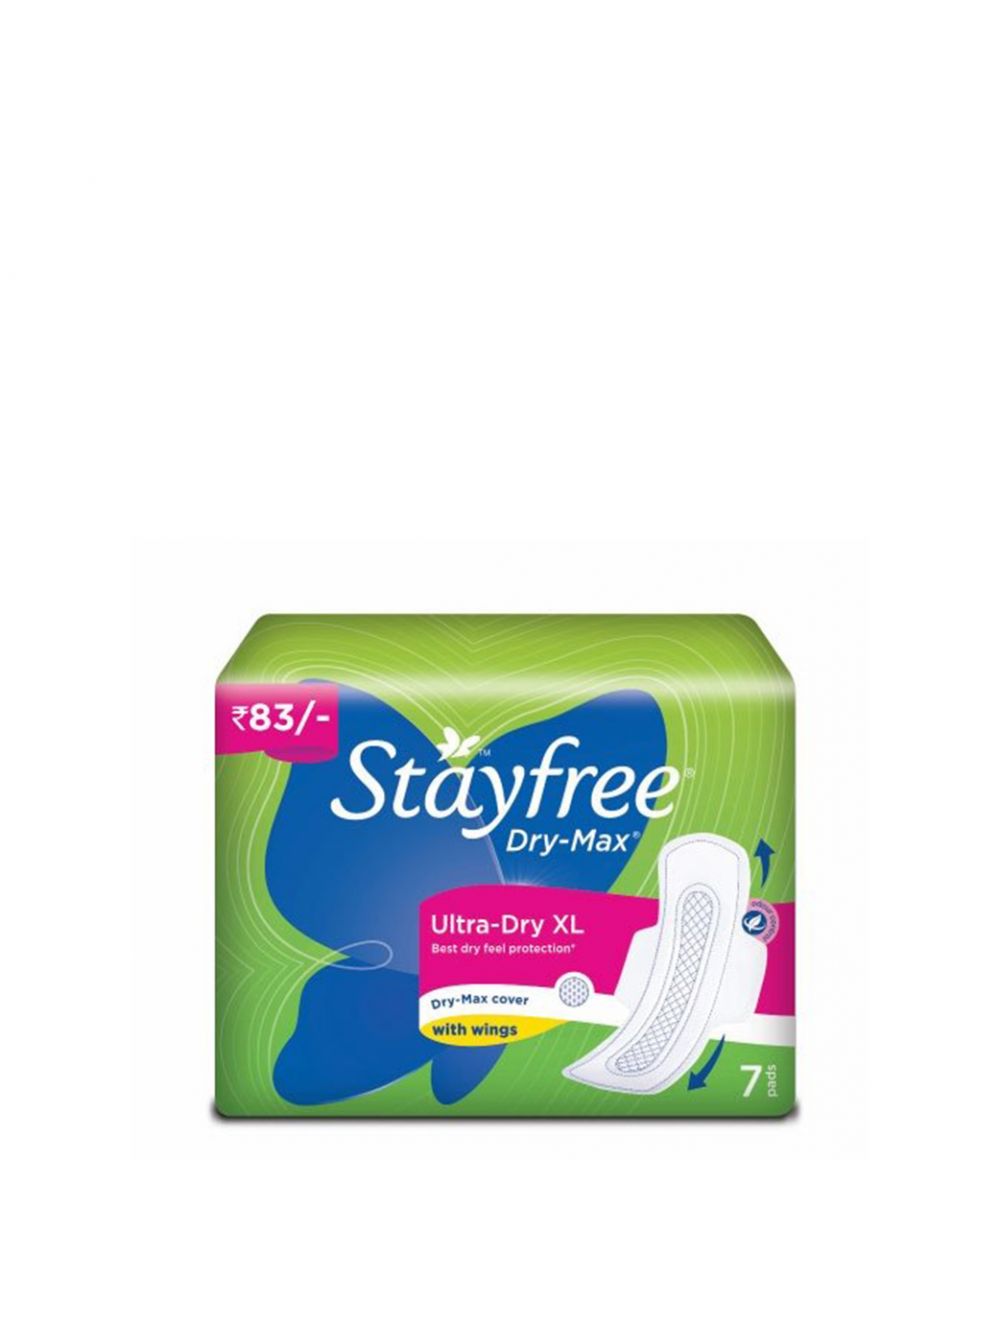 Stayfree Dry Max Ultra Dry XL (7 Pads)